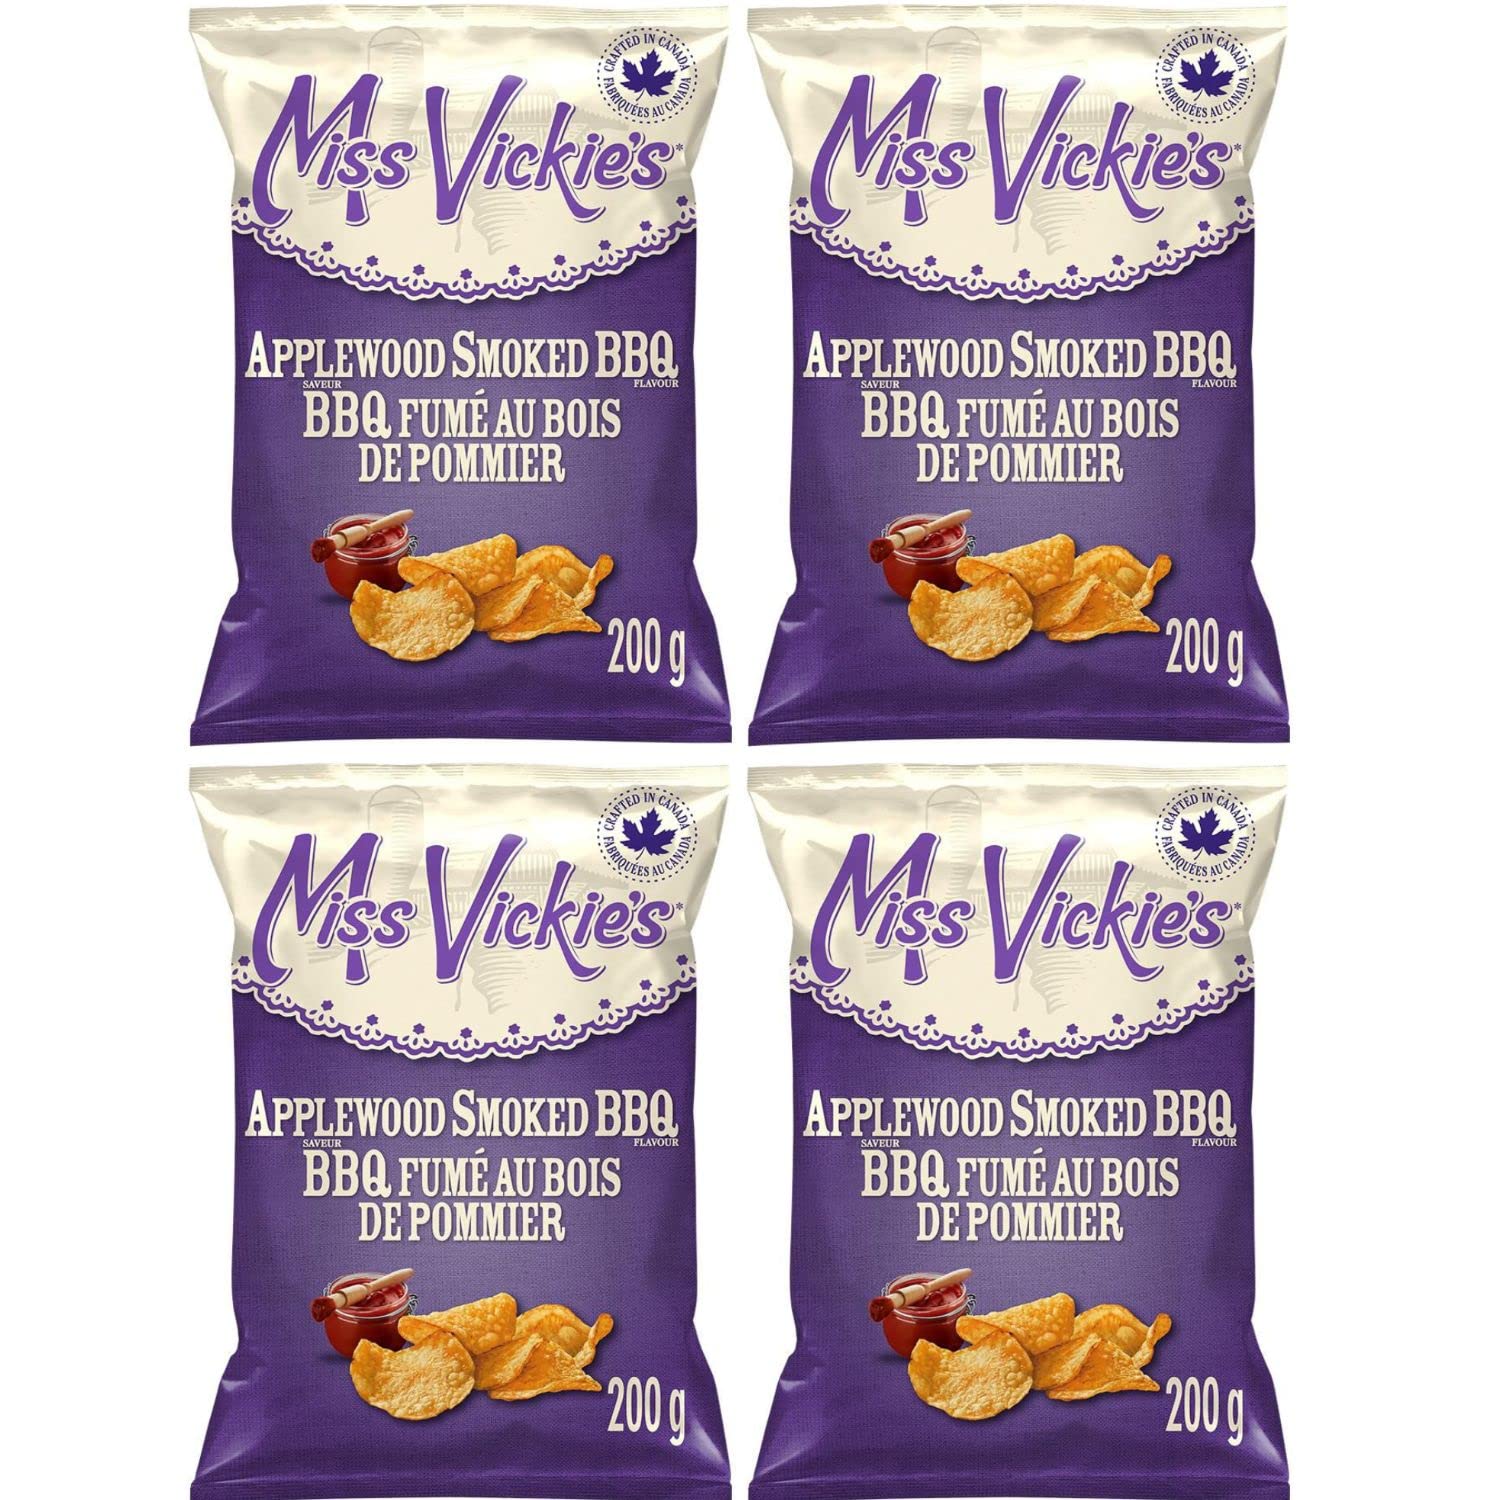 Miss Vickies Applewood Smoked BBQ Chips pack of 4